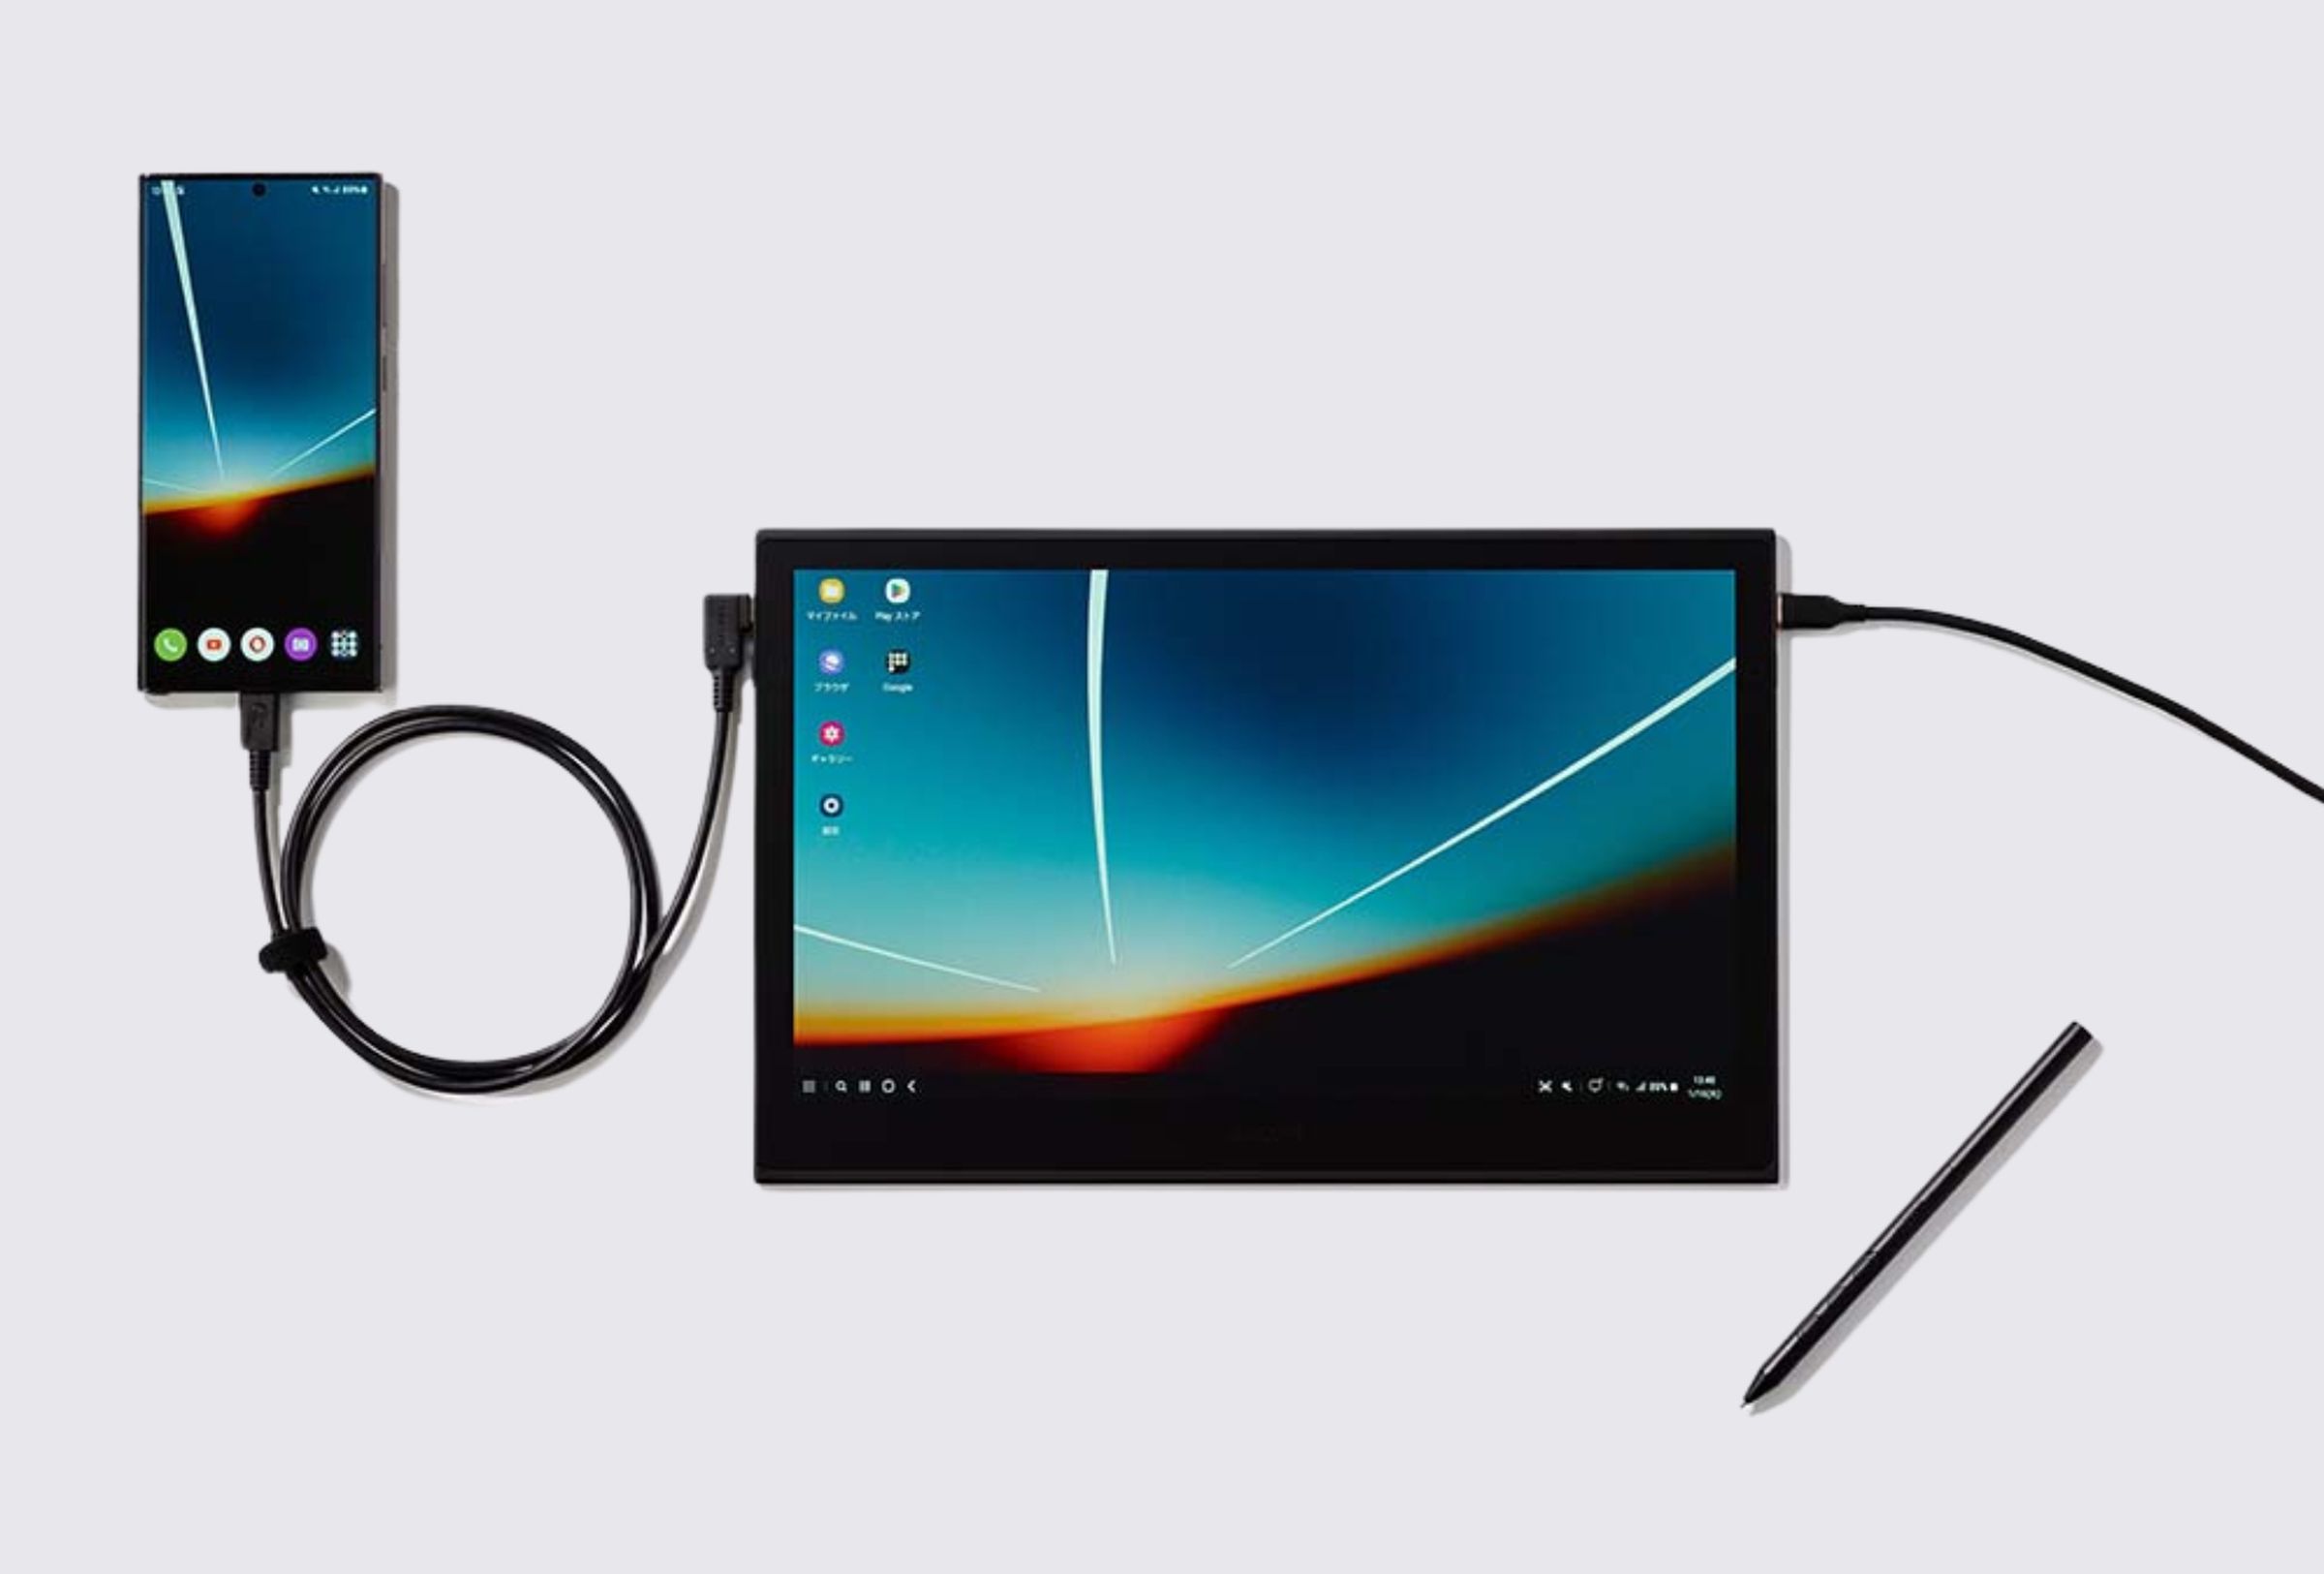 The Wacom Movink 13 drawing tablet connected to an Android phone.